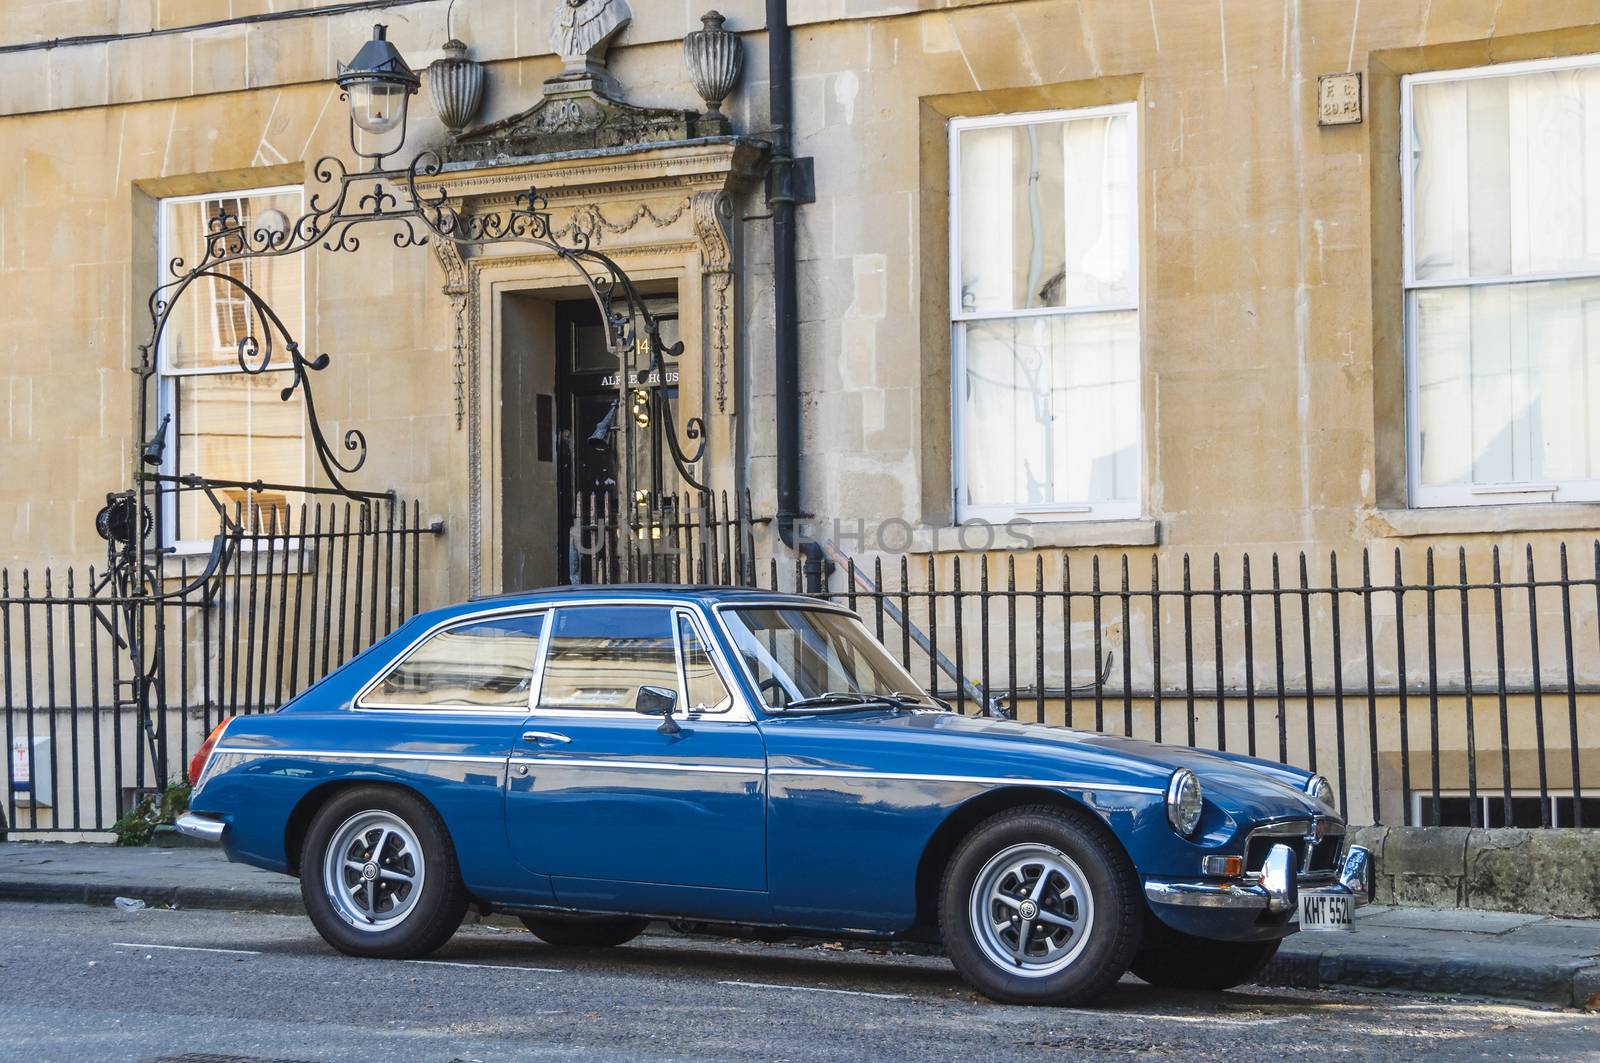 BATH, UK - CIRCA OCTOBER 2011: A blue MG MGB GT parked in the street.